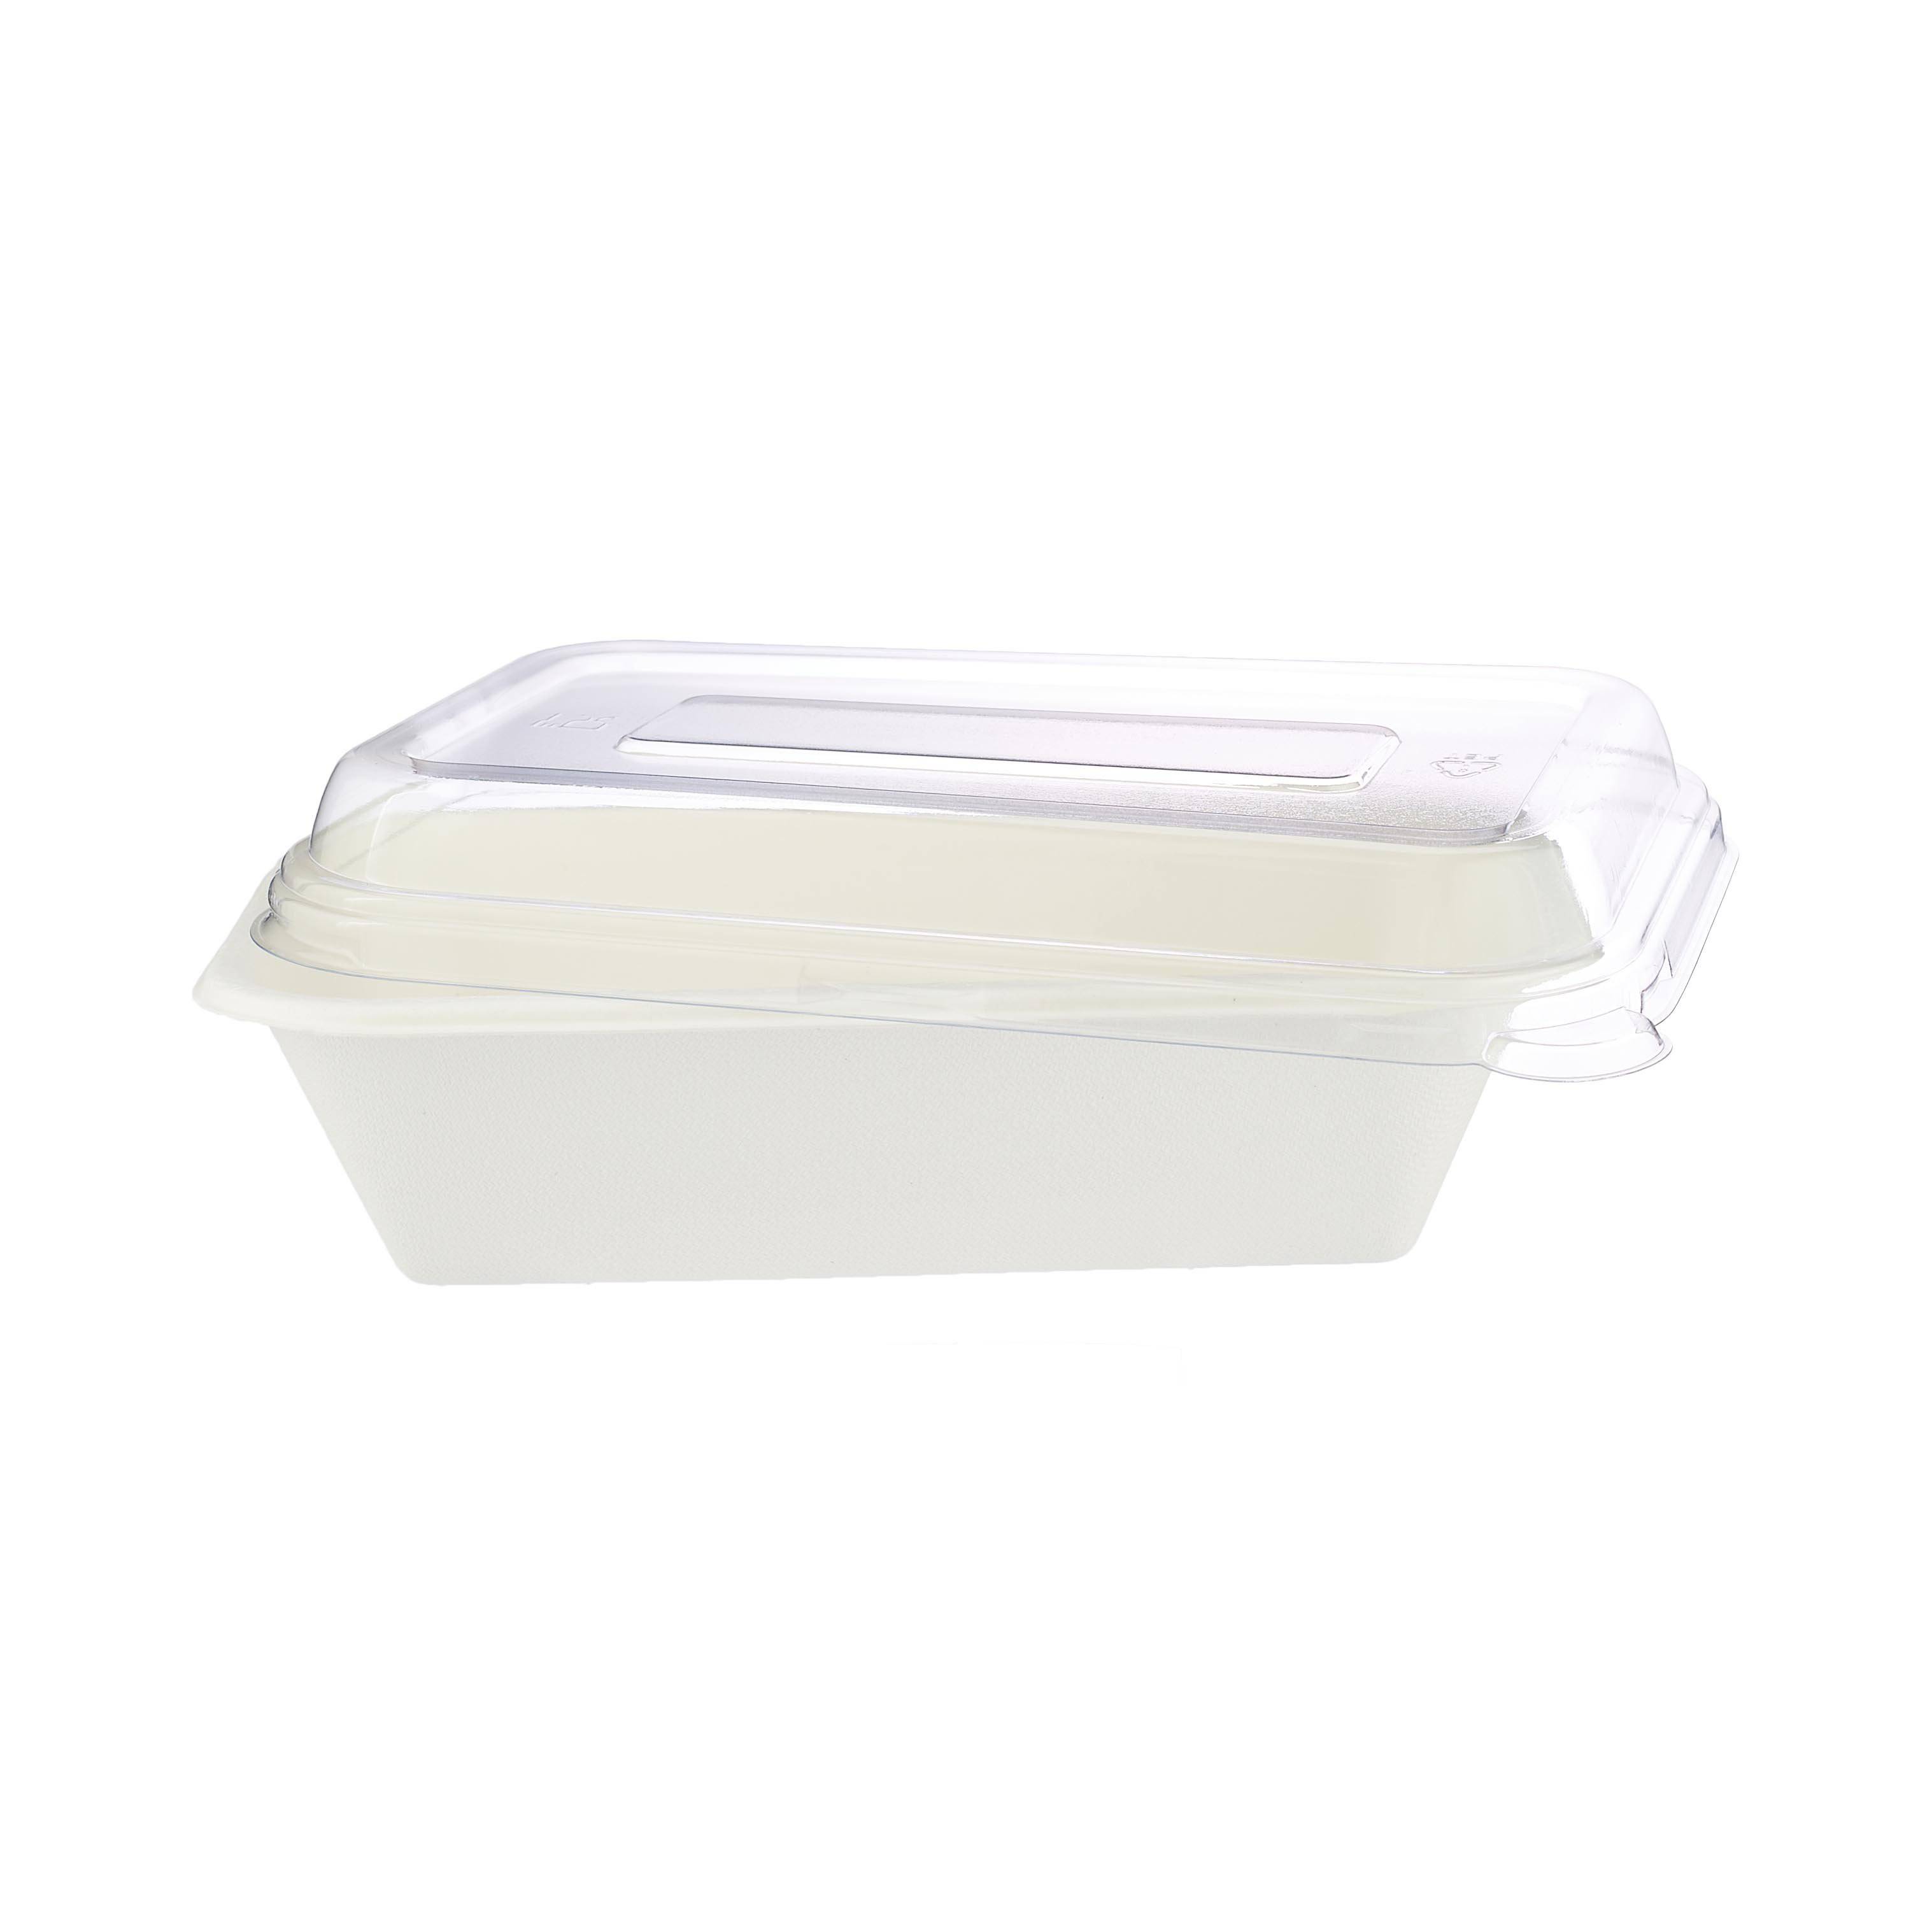 Clear Bio-Degradable 24/32 Oz Multi-Purpose Container Lid Only